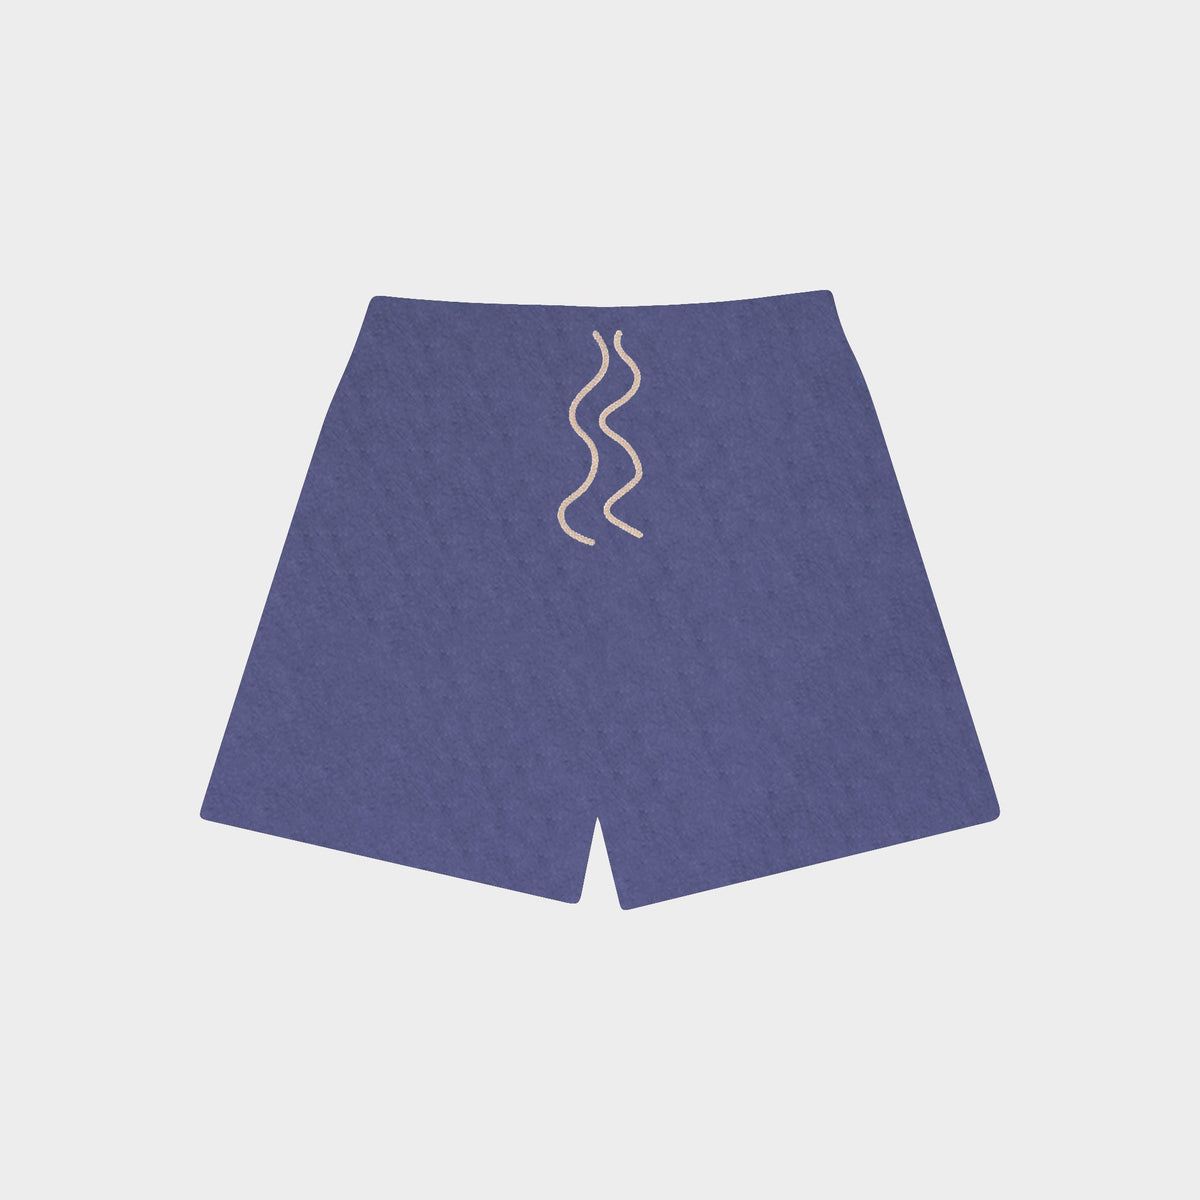 Just Towel Shorts - Navy - RED LETTERS